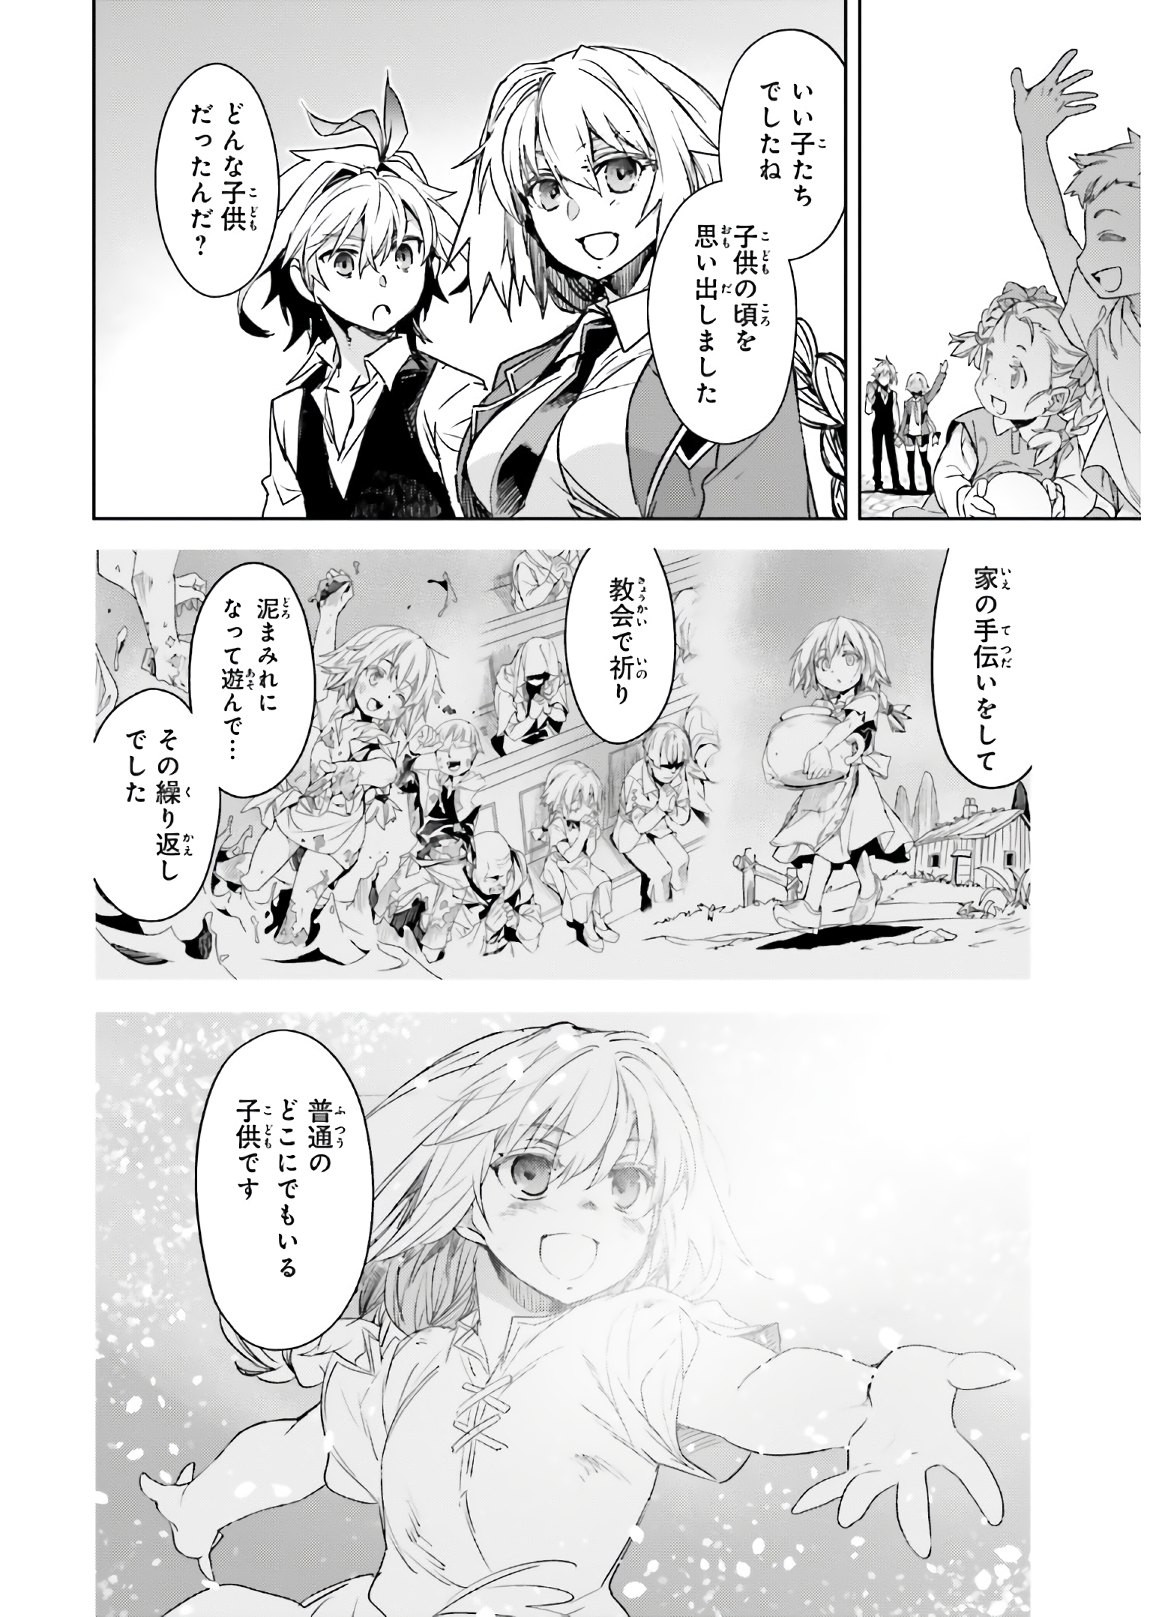 Fate-Apocrypha - Chapter 46 - Page 8